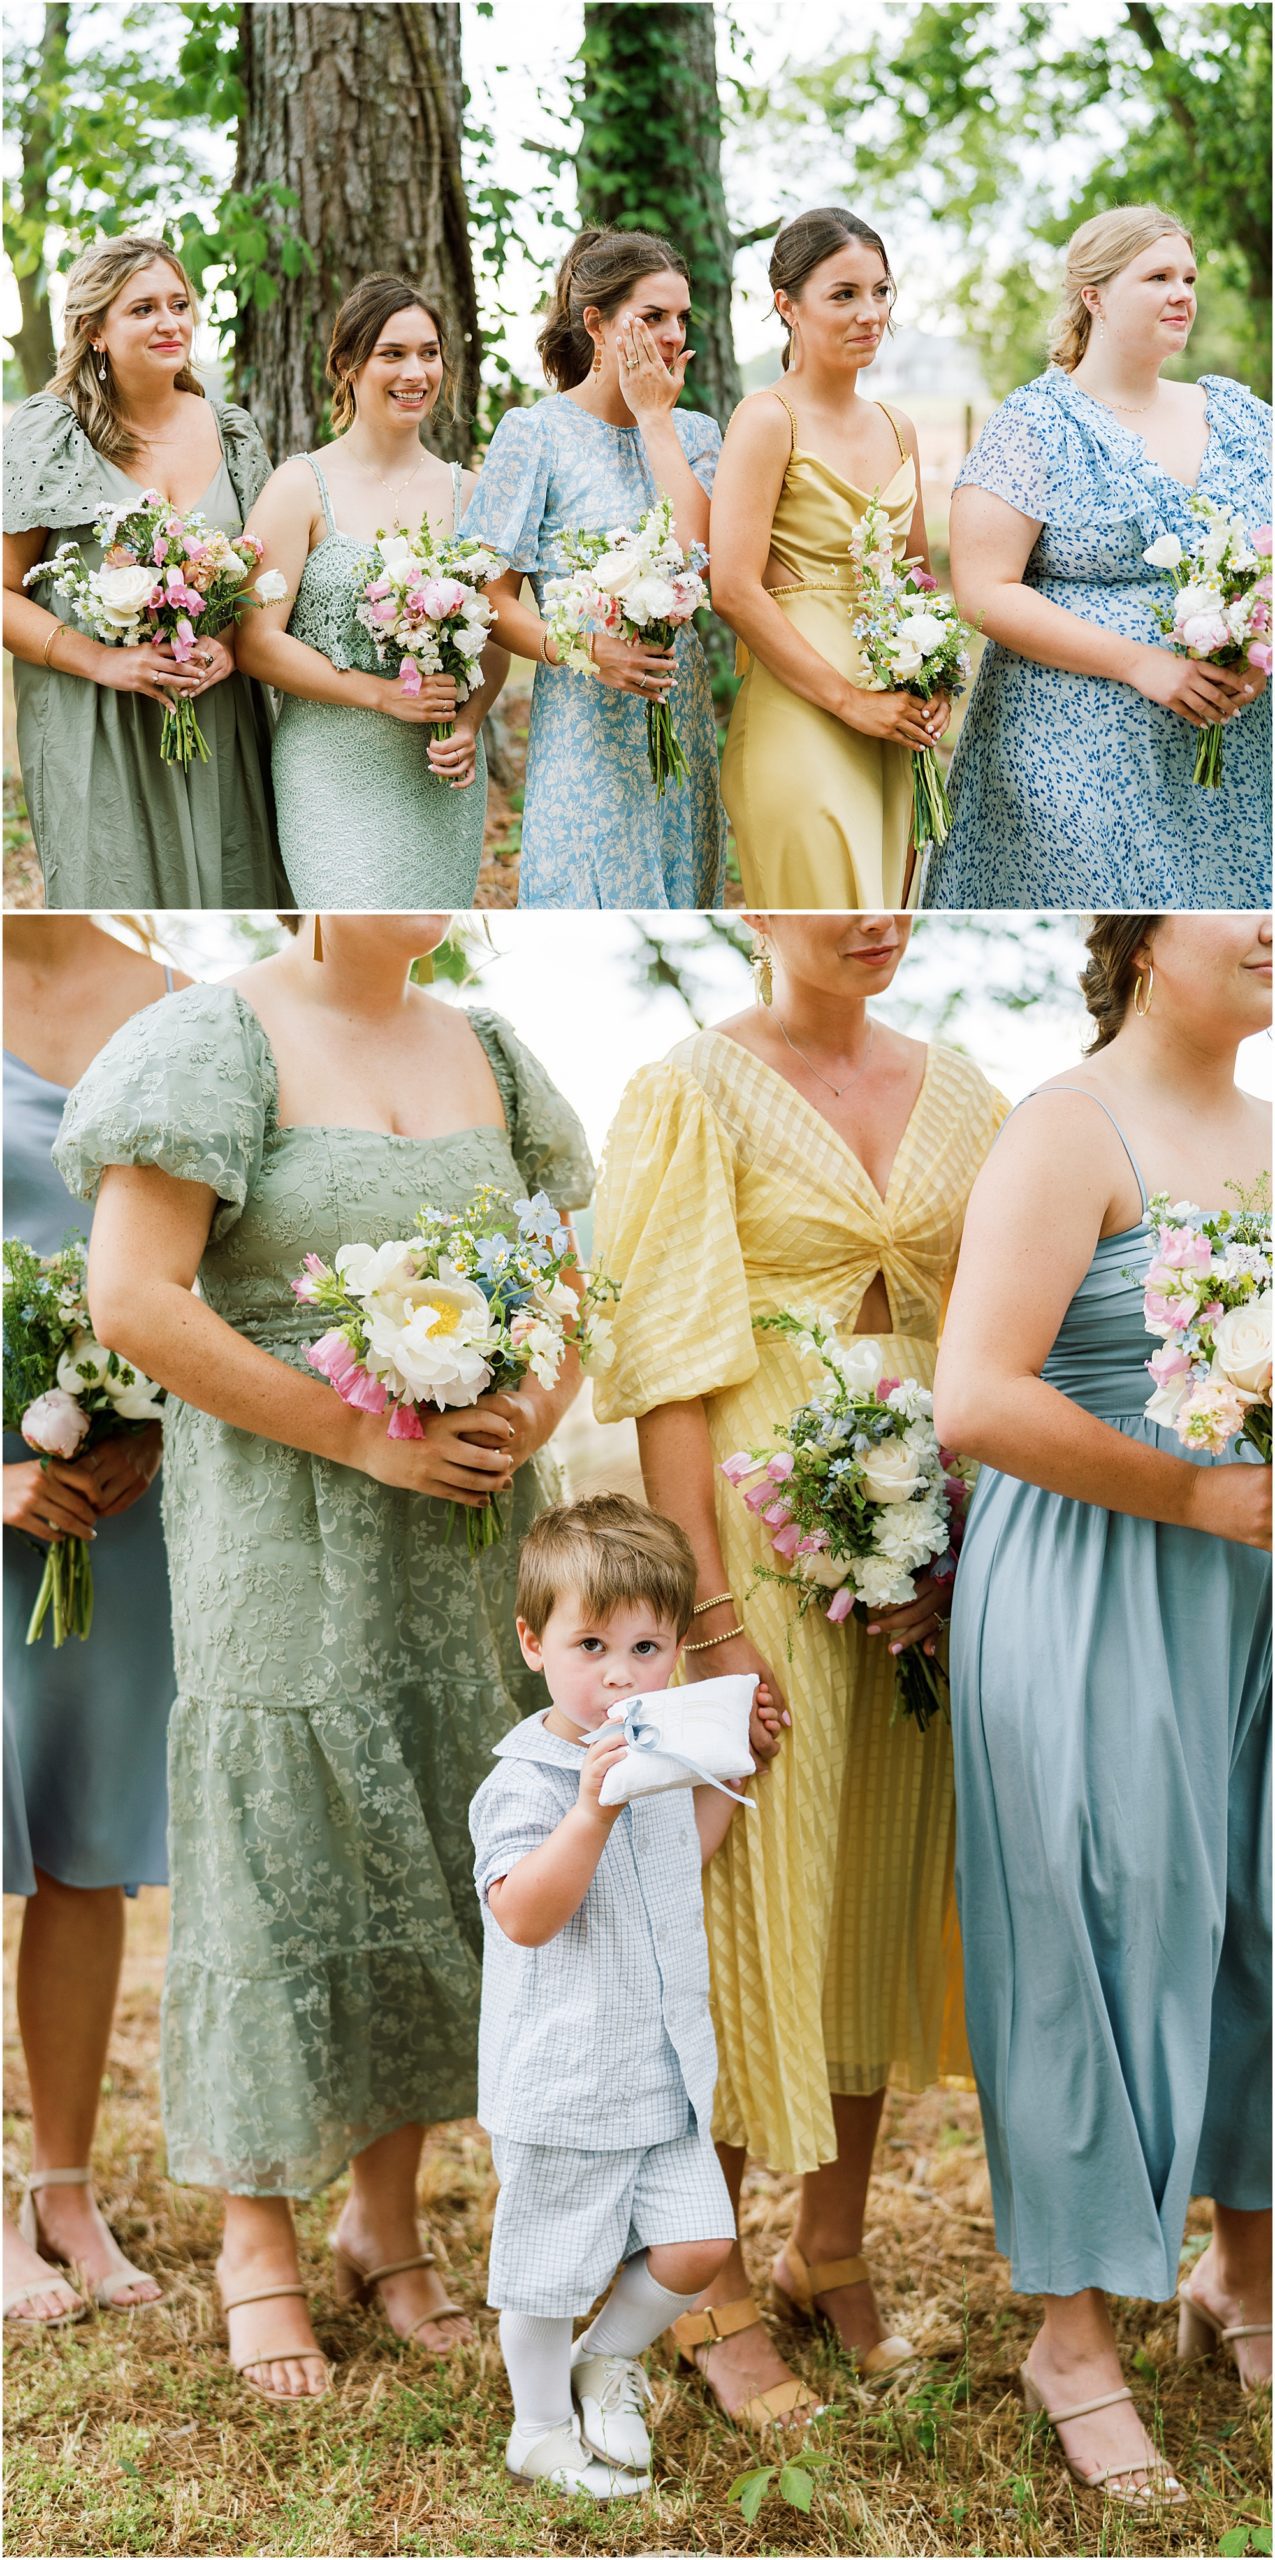 Bridesmaids in blue, green, and floral patterns with ring bearer.